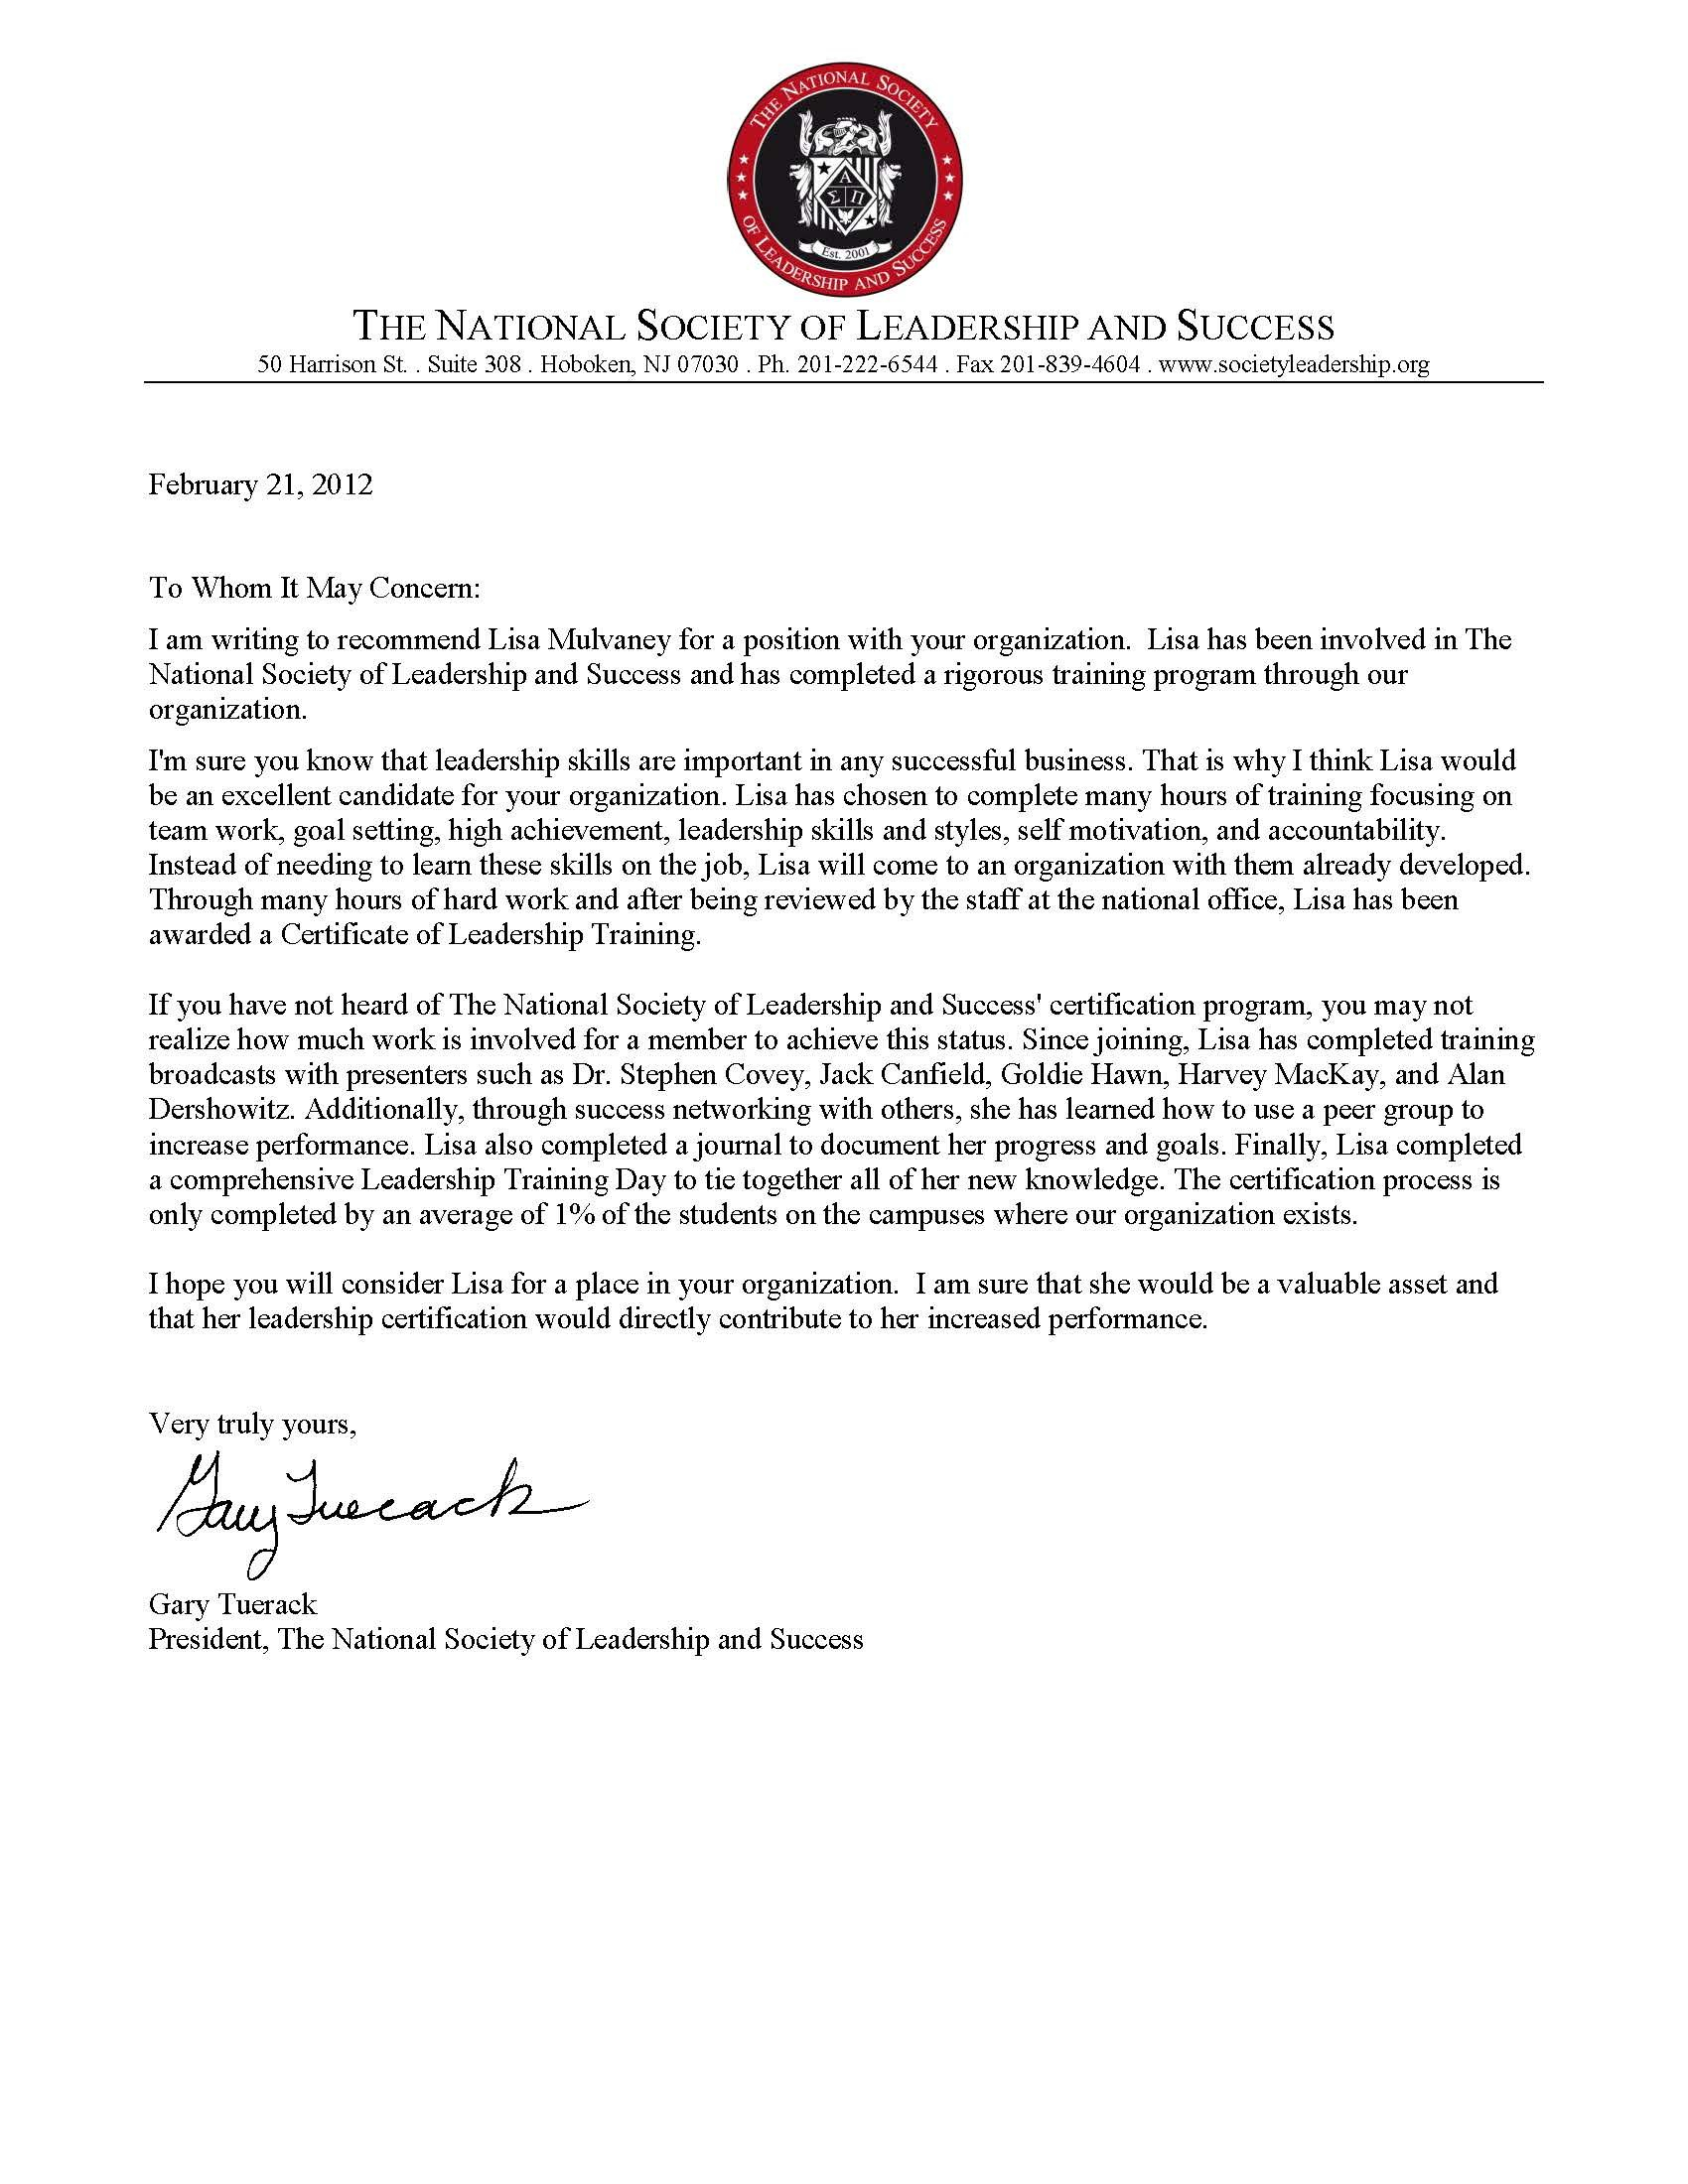 Letter Of Recommendation From The National Society Of inside proportions 1700 X 2200